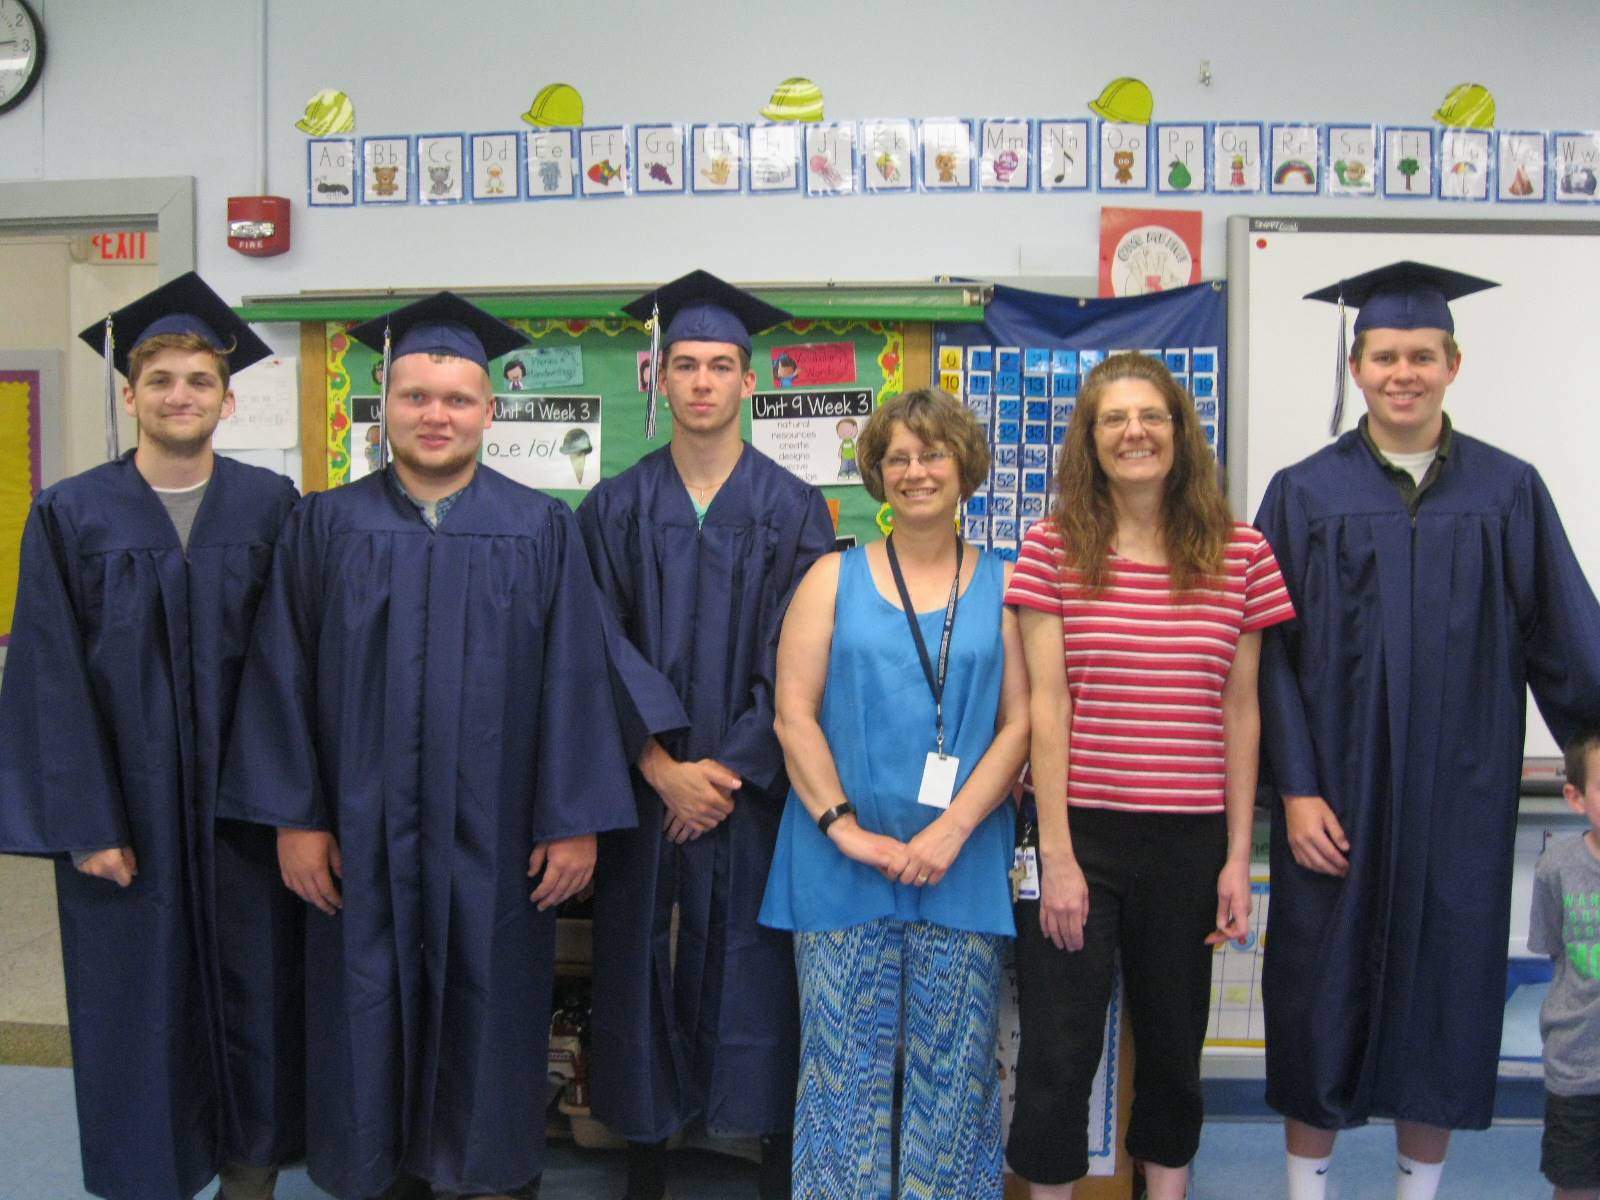 4 seniors pose with their former teacher and school counselor